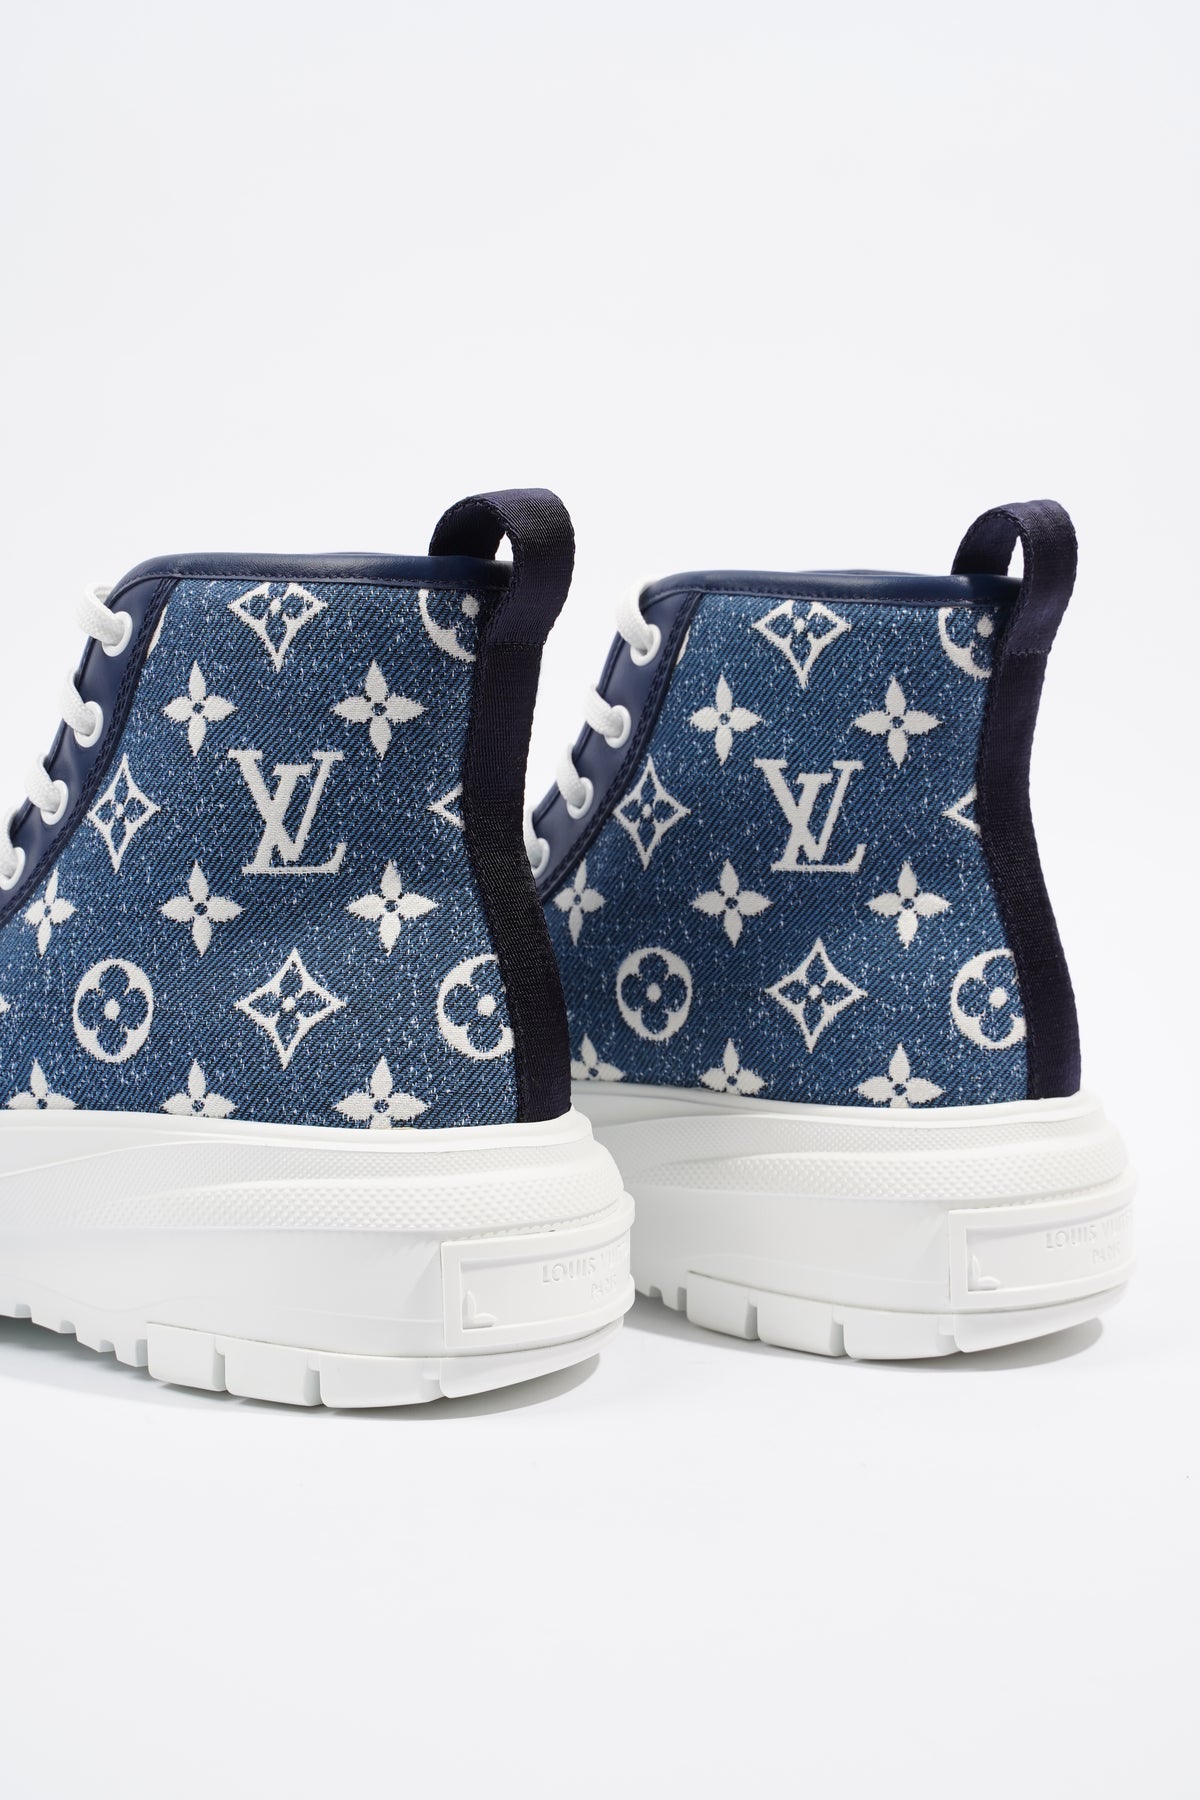 LV Squad Trainer Boots - OBSOLETES DO NOT TOUCH 1AACV6